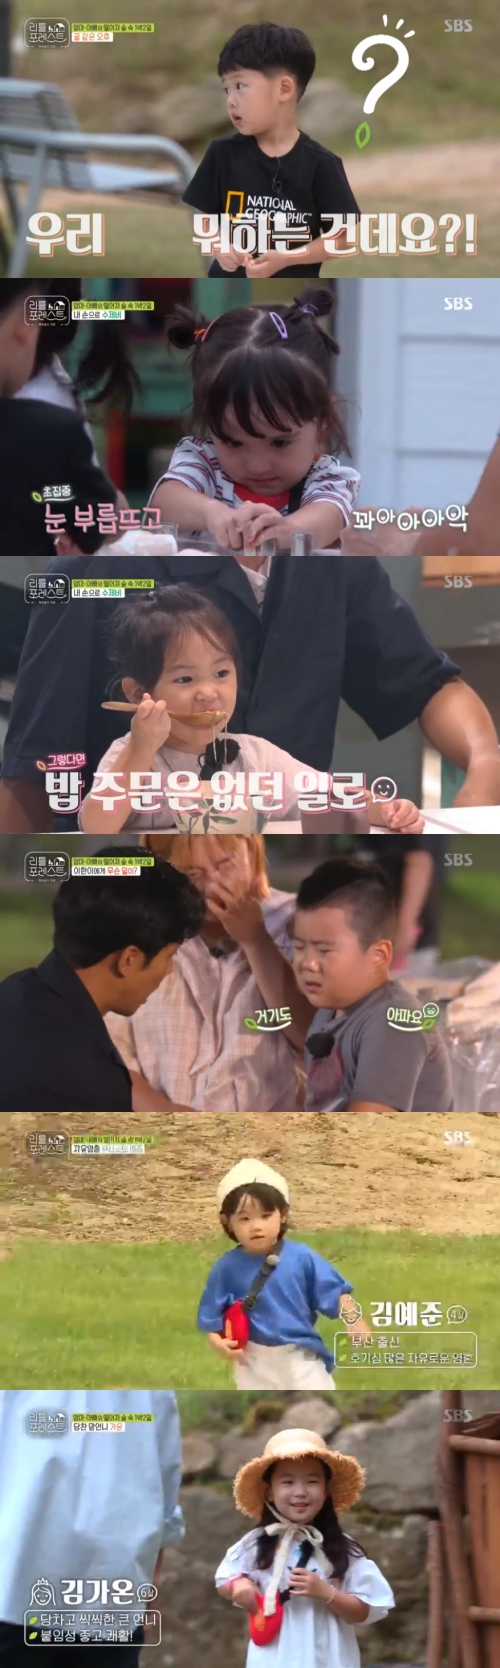 Little Forest Four-year-old free soul Ye Jun and six-year-old eldest sister Gaon joined the third meeting.In the SBS entertainment program Little Forest broadcasted on the 3rd, the second parting and the third meeting of the bumbang were drawn.On this day, carers and littles challenged to make Sujebi.Lee Seo-jin admired Lu Shuming, boiled with Sujebi soup, as it was darkly colored, saying, This is a complete snake, a snake.Park Na-rae suspected he was not in Lu Shumings dark colour, but after tasting, Lee Seo-jin said: Im getting stuck, I cant even deal with him before.The depth of the soup, said Park Na-rae, who also expressed surprise after tasting Lu Shuming.The carers then kneaded Sujebi to put in the soup, and took a shape with the little ones to complete the Sujebi dough.Littles enjoyed their own Sujebi, which made them proud of their care.However, Lee Han-yi woke up without drinking a few hard-made Sujebi and was embarrassed.When Park Na-rae followed and expressed concern, Lee Han-i said, My stomach hurts. The day was filled with water and hurriedly eaten white soup.Park Na-rae apologized, I didnt know my aunt, Im sorry, and then explained to Lee Seung-gi, I think she pretended, this is groundy, this is stomach aches.Lee Seung-gi added, Oh and Lee Han-yi did not shit, adding that Lee added the official spokesman to the care.Lee Seung-gi then massaged Lees body and stomach and fed him digestive drugs.Lee Han-yi expressed his rejection, saying, I do not think it will taste, but Lee Seung-gi persuaded him to drink a fire extinguisher coolly.But Lee finally burst into tears at the appearance of his mother who came to pick him up, and then Lee Seung-gis I have to tell you whats missing.How did you fall out? He replied, corn and laughed as he showed tears.After that, when Littles left with their parents, the carers showed their sadness in the cool attitude of Little.Lee Seo-jin then advised, Dont expect too much from your kids, and with my Lisa.Lee Seung-gi shot Lee Seo-jin, saying, I am so beautiful because my brother is so beautiful. I followed Brooke all the time and heard the evidence of trying to pick up plums.Lee Seo-jin then revealed a dimpled smile and did not deny my Lisa towards Brooke.At this time, Lee Han appeared again, and when Lee said, I was tired of it, Lee Seung-gi led Lee to the bathroom, laughing Why did not I go?When Lee Han-yi left the ball after finishing the ball, Jung So-min and the carers laughed, saying, Its an ending fairy.The third meeting with Little Lee was drawn. In the third meeting, four-year-old Busan boy Kim Ye-jun joined the group.Yejun threw off his shoes at the same time as he arrived, and emanated the energy of free soul.The six-year-old, the eldest sister Ga-on Kim, also arrived following: Gaon said, Hi Im Gaon, and asked the camera gently, Whats your name?Lee Seo-jin said to the camera where Gaon asked for his name, If you ask me your name, answer me. Park Na-rae replied instead of pretending to be a camera and laughed.Lee Seung-gi predicted that Seo Jin-yi has a child to concentrate on besides Brooke, and Park Na-rae said, The new friends are active.Its very good because its active, he praised.